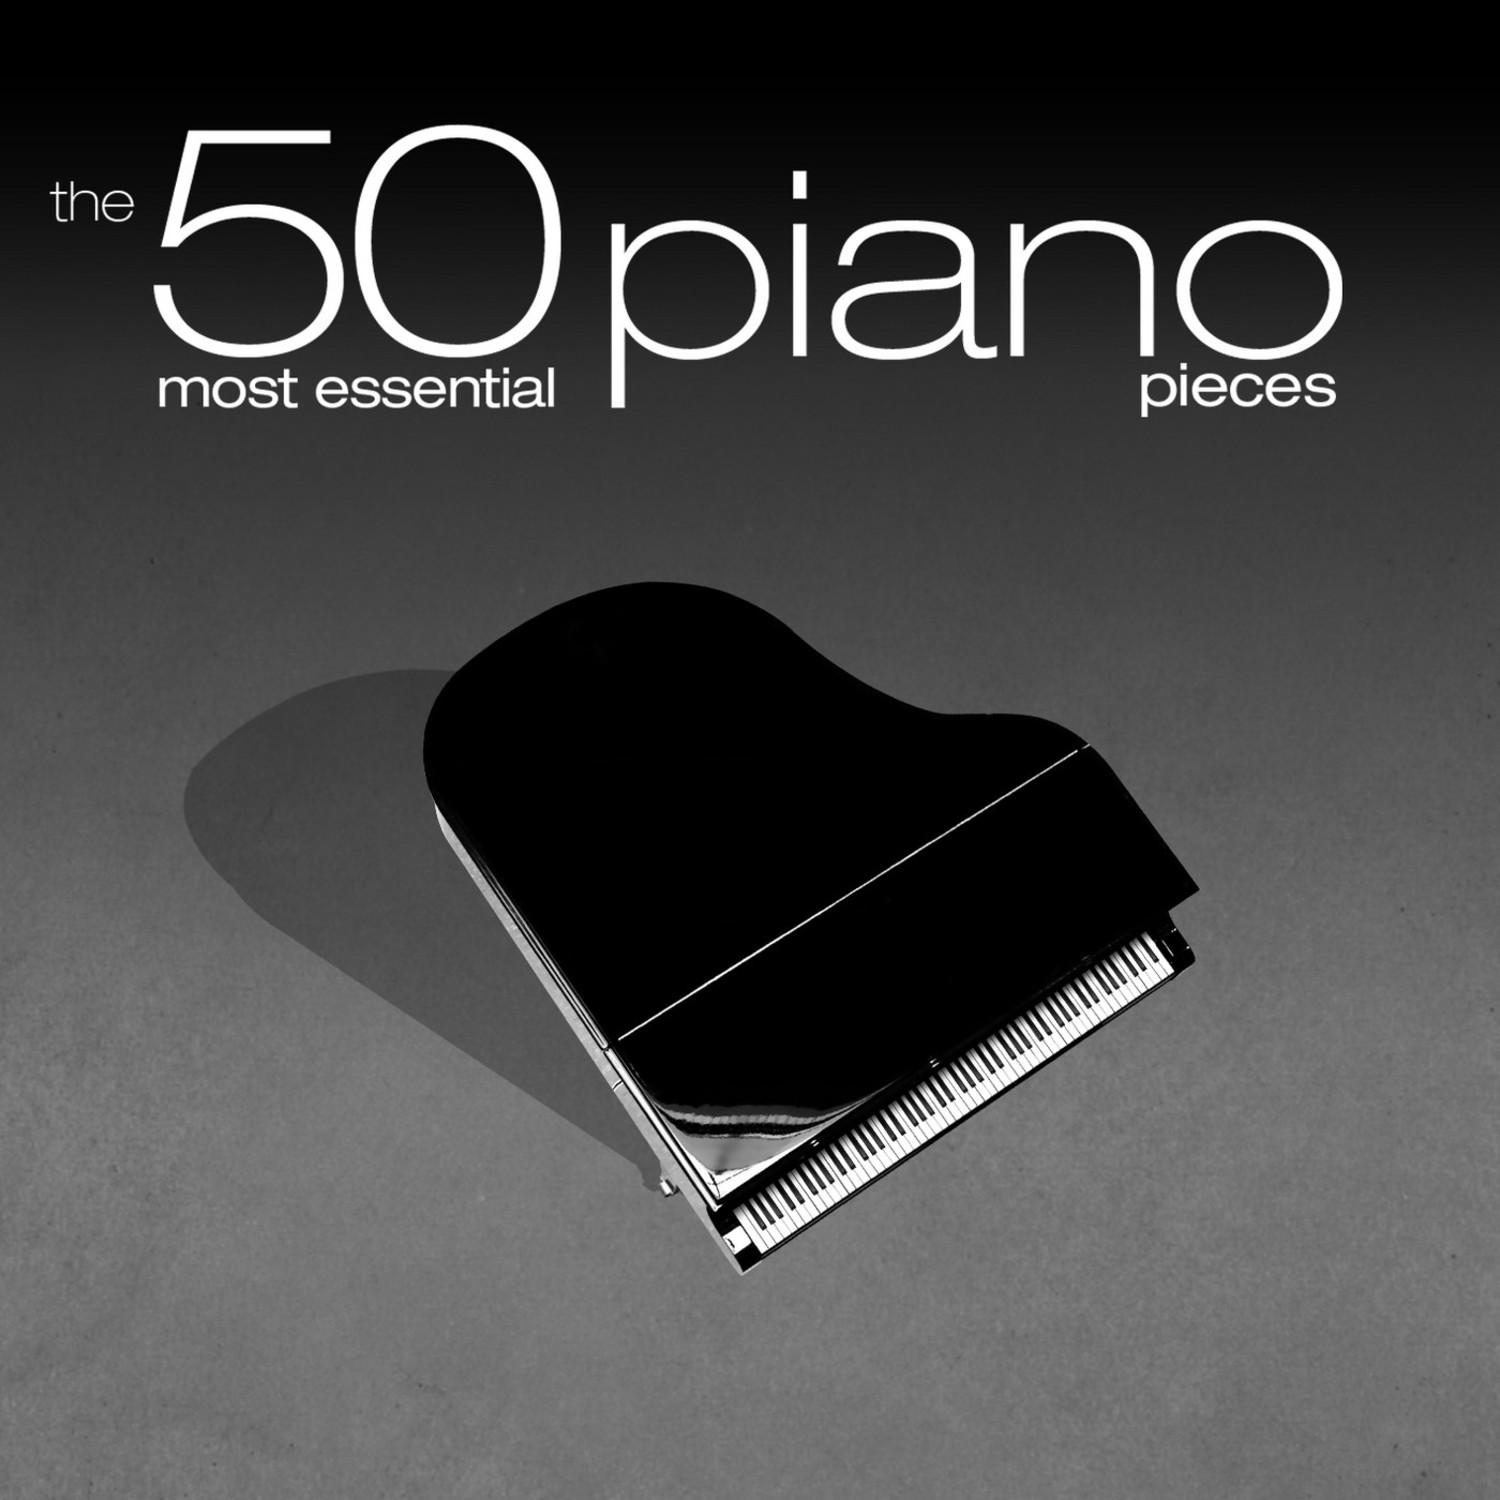 Sonata No. 2 in B Minor for Piano, Op. 35: IV. Funeral March: Lento